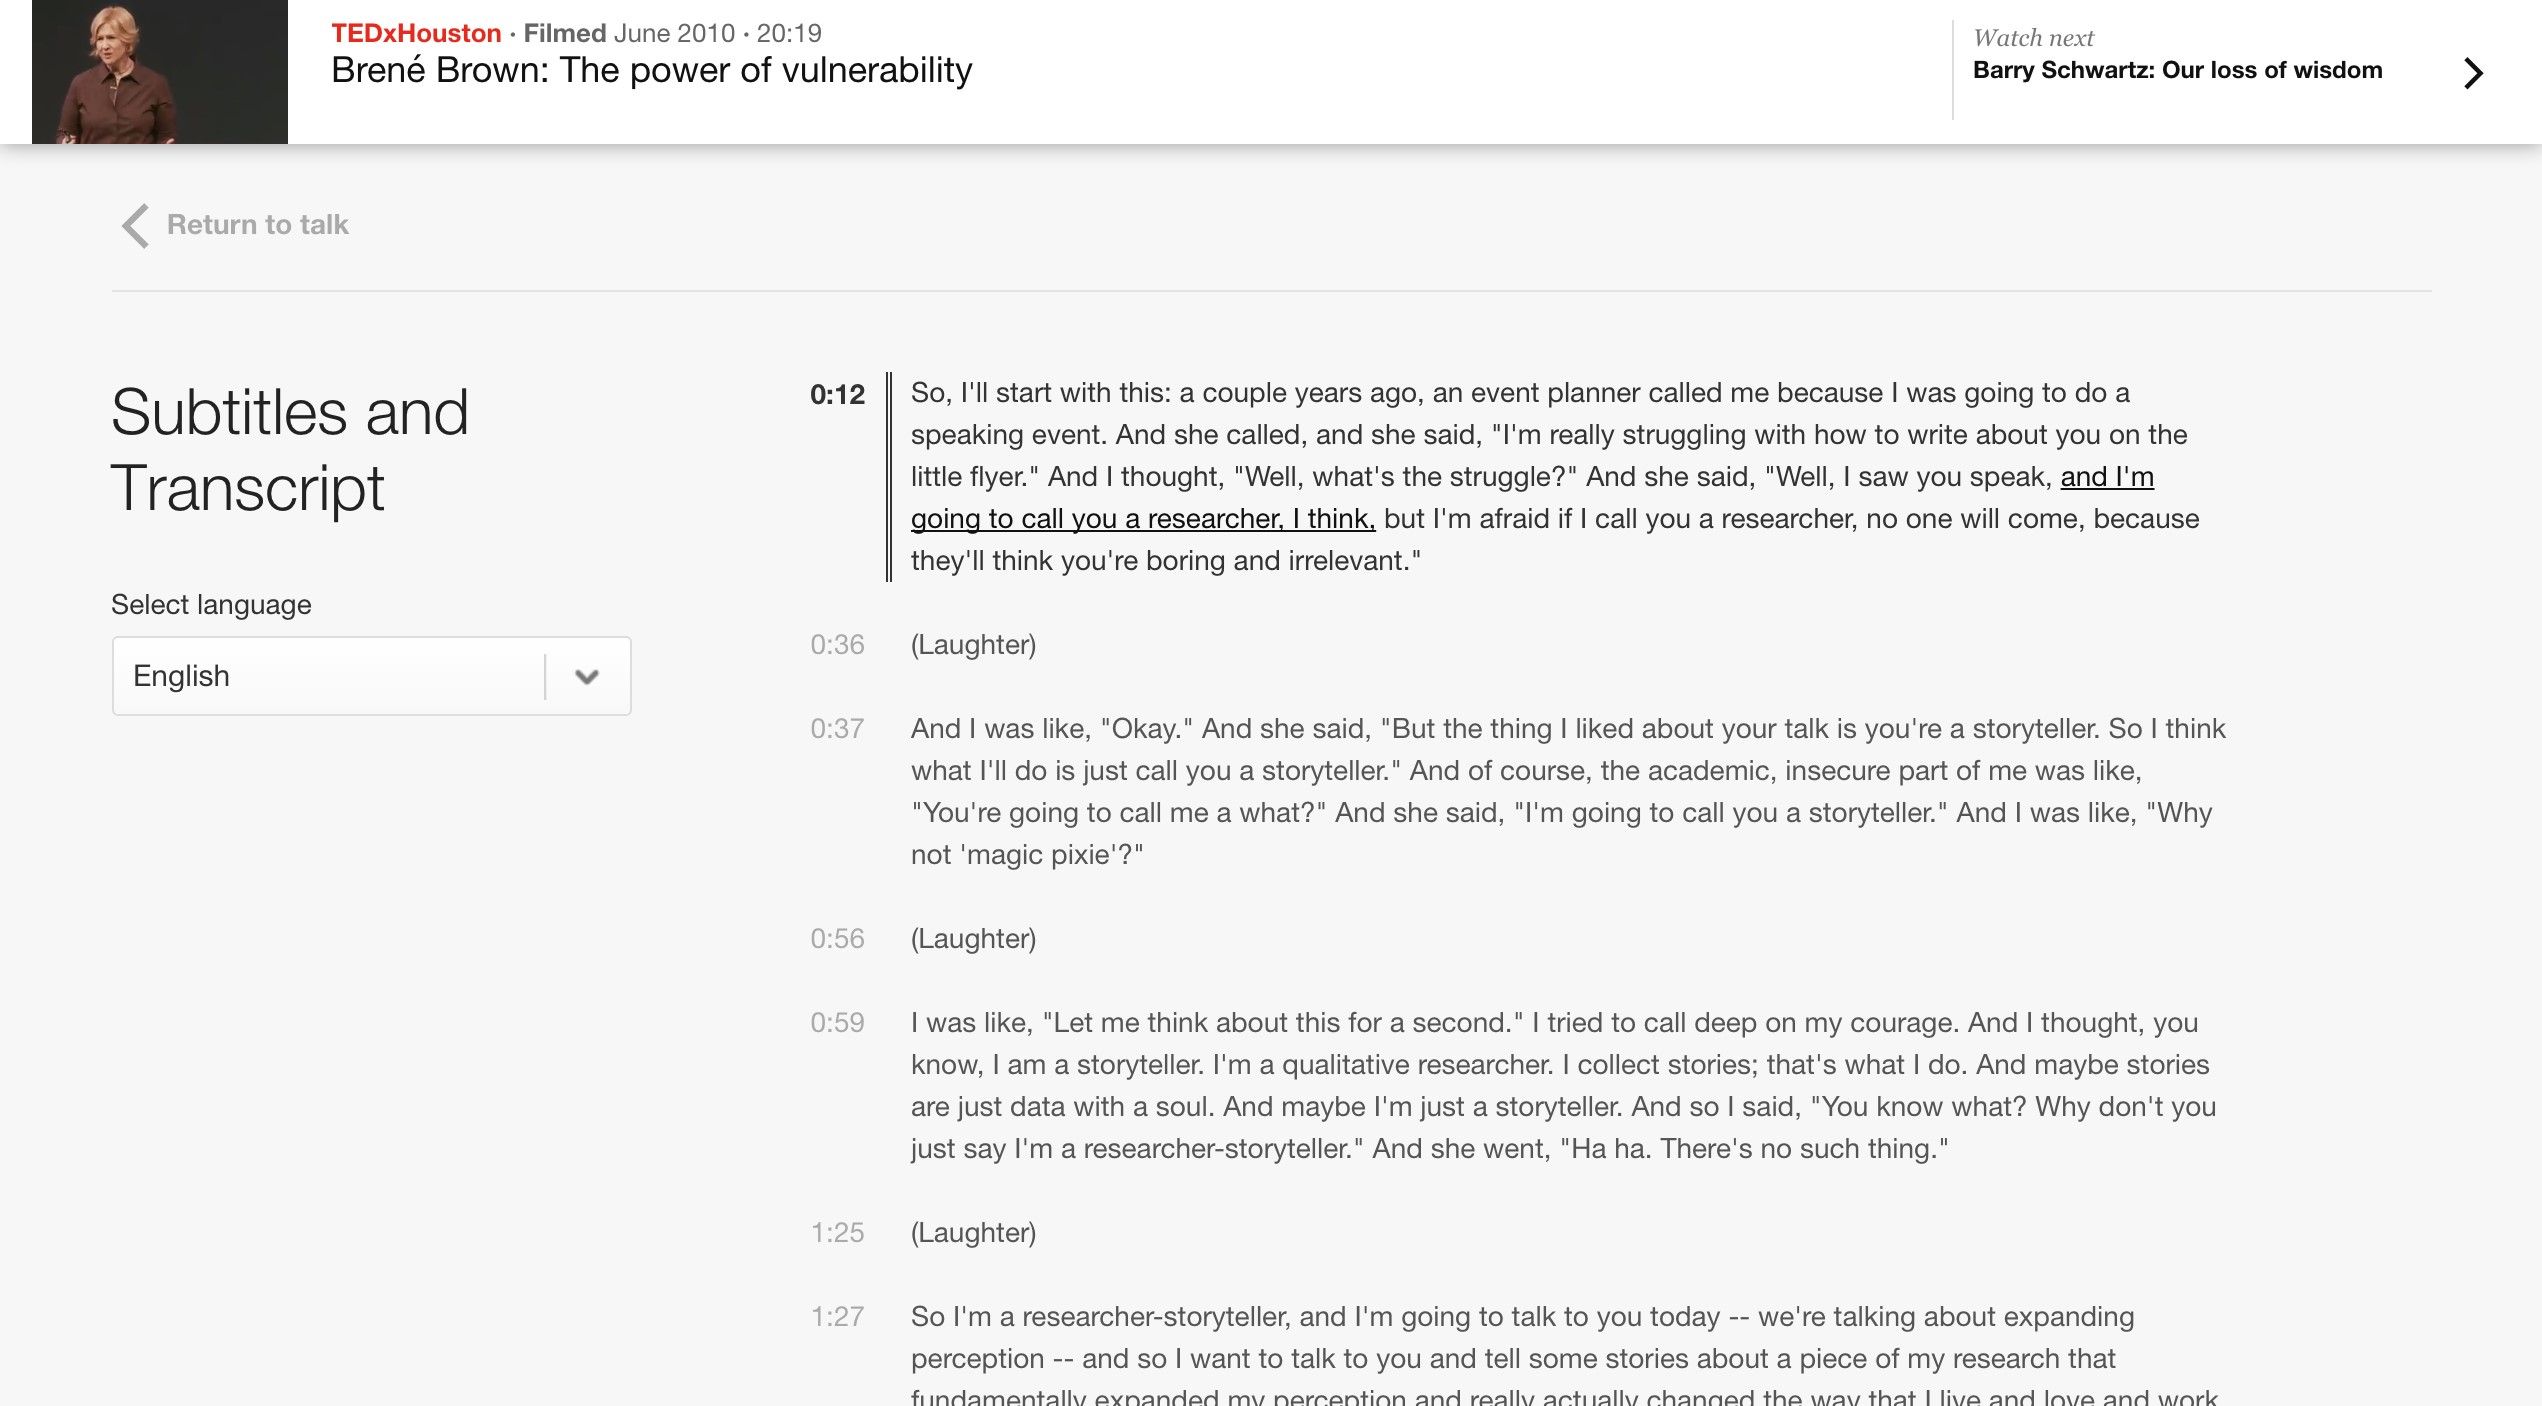 Screenshot of the TED website that shows the transcripts of a video, highlighting the text to indicate what is being spoken while the video plays.